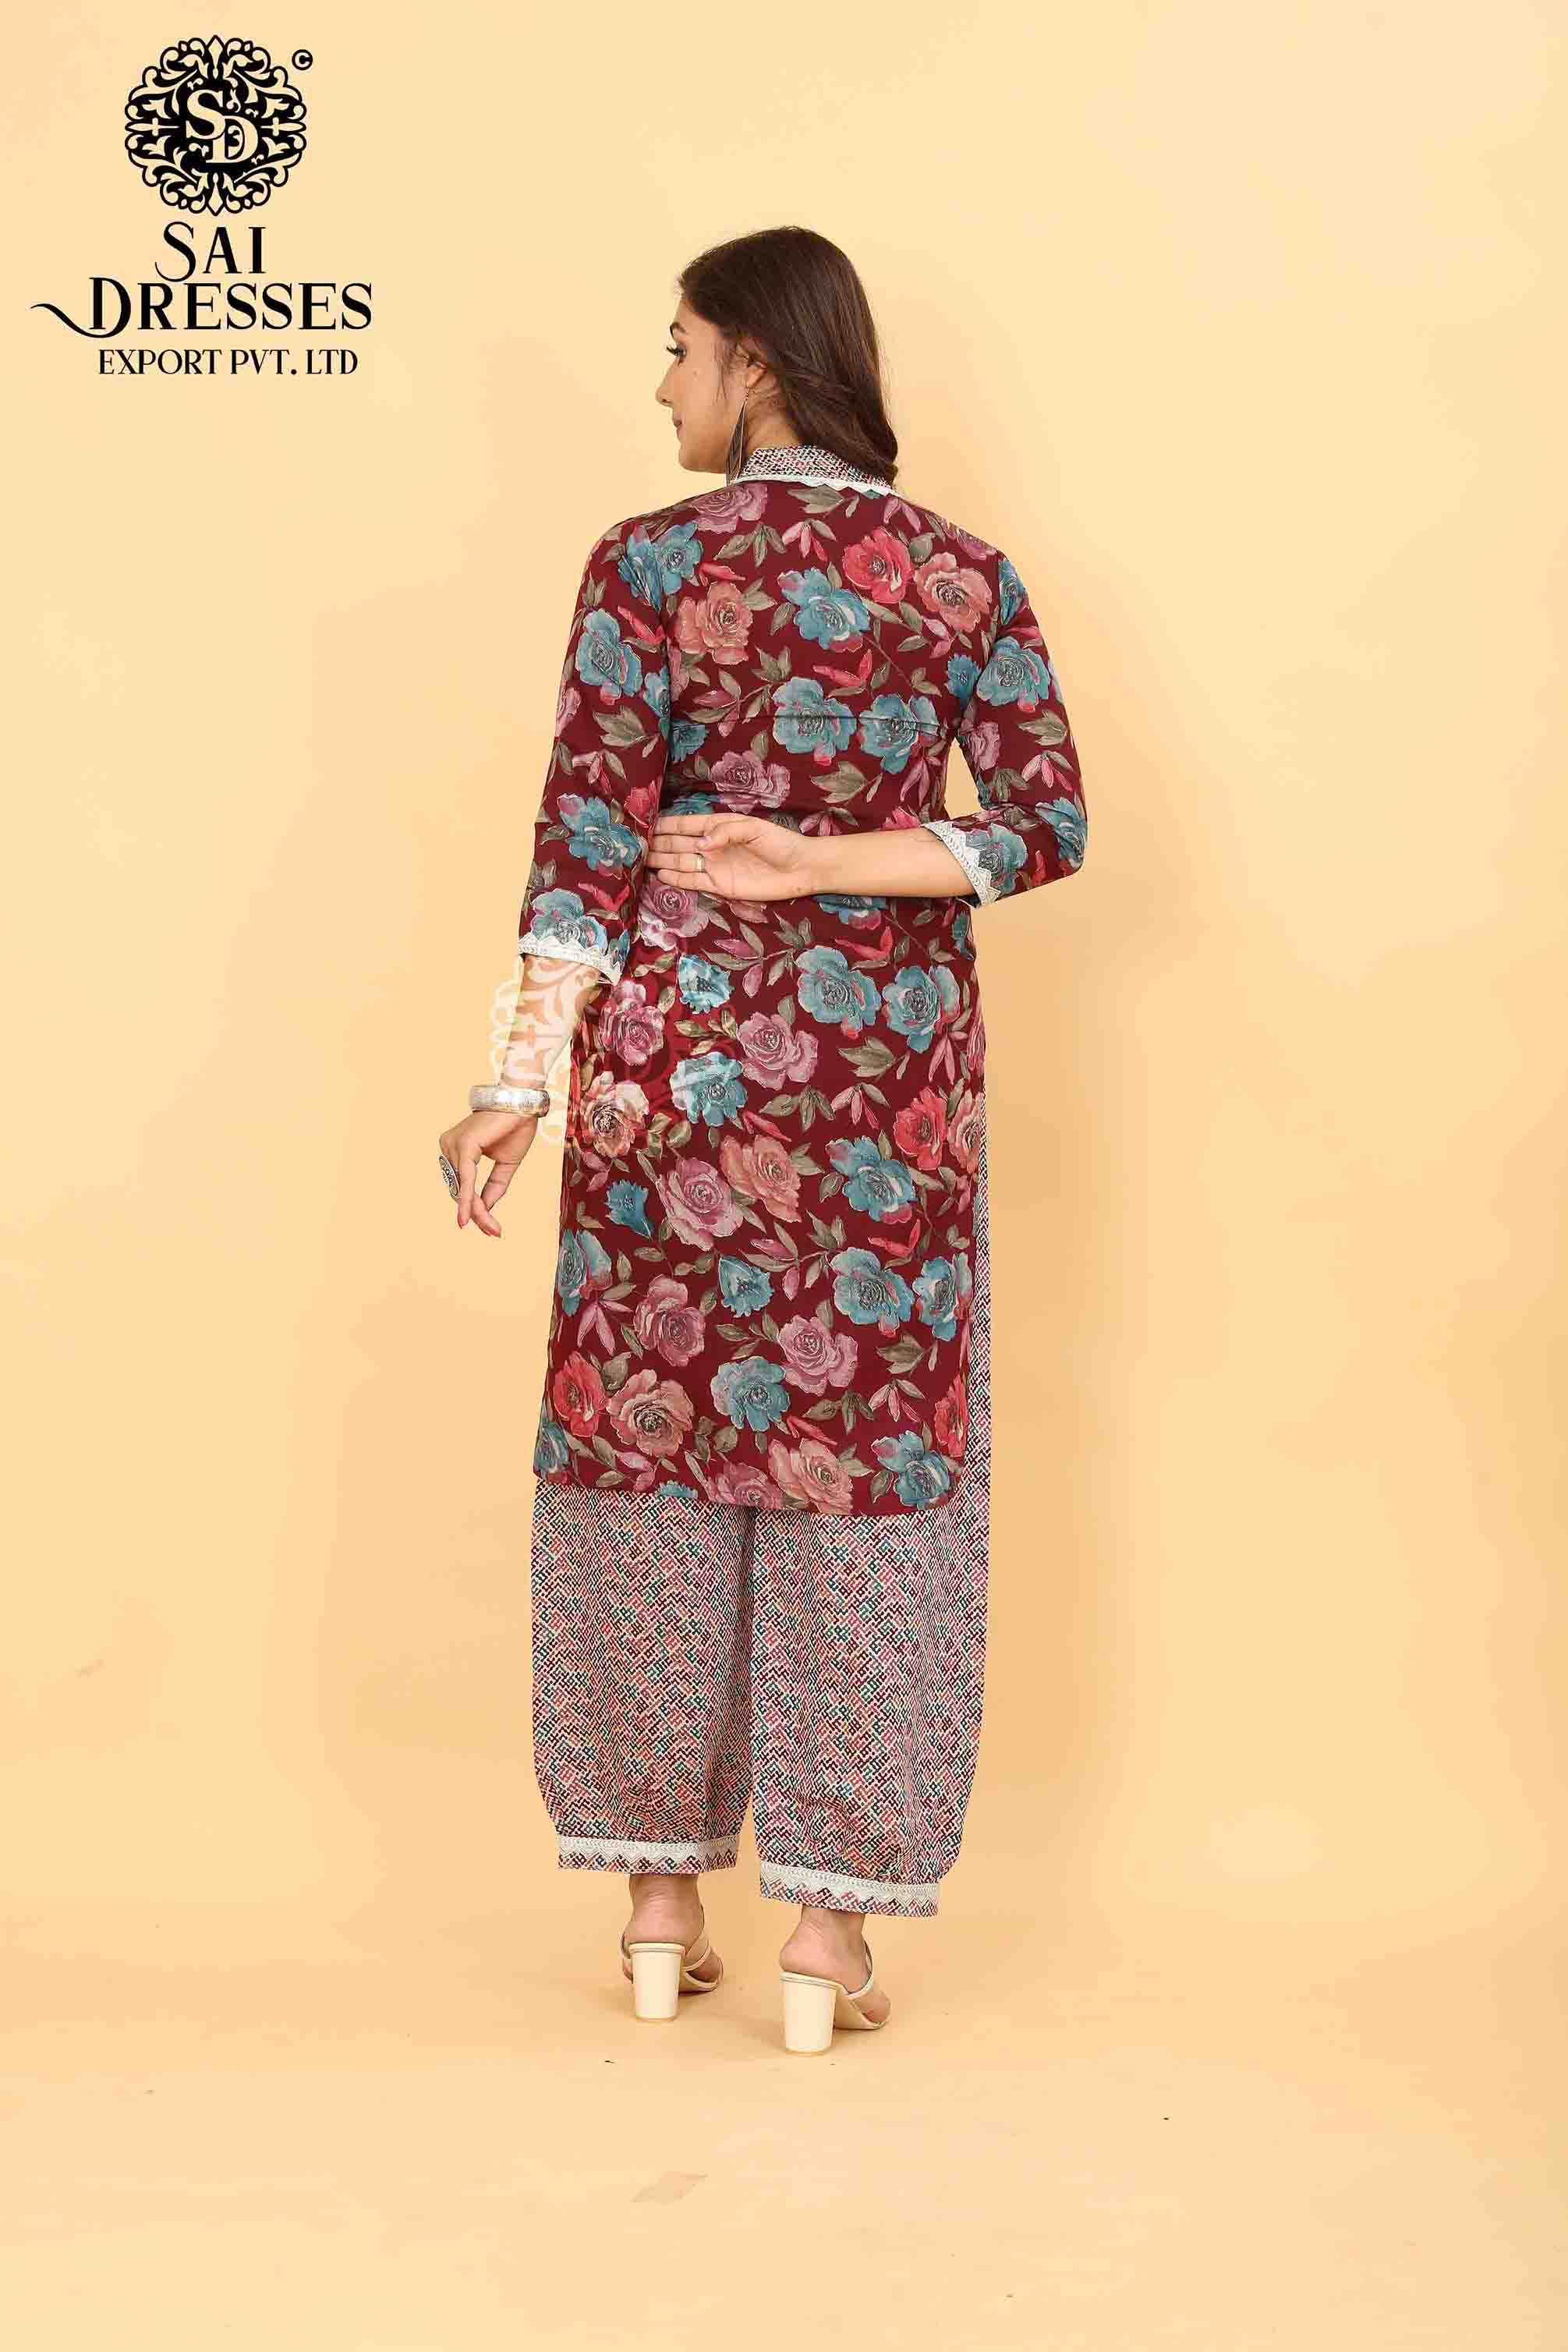 SAI DRESSES PRESENT D.NO SD 5017 READY TO EXCLUSIVE TRENDY WEAR PATHANI KURTA WITH AFGHANI PANT STYLE COMBO COLLECTION IN WHOLESALE RATE IN SURAT